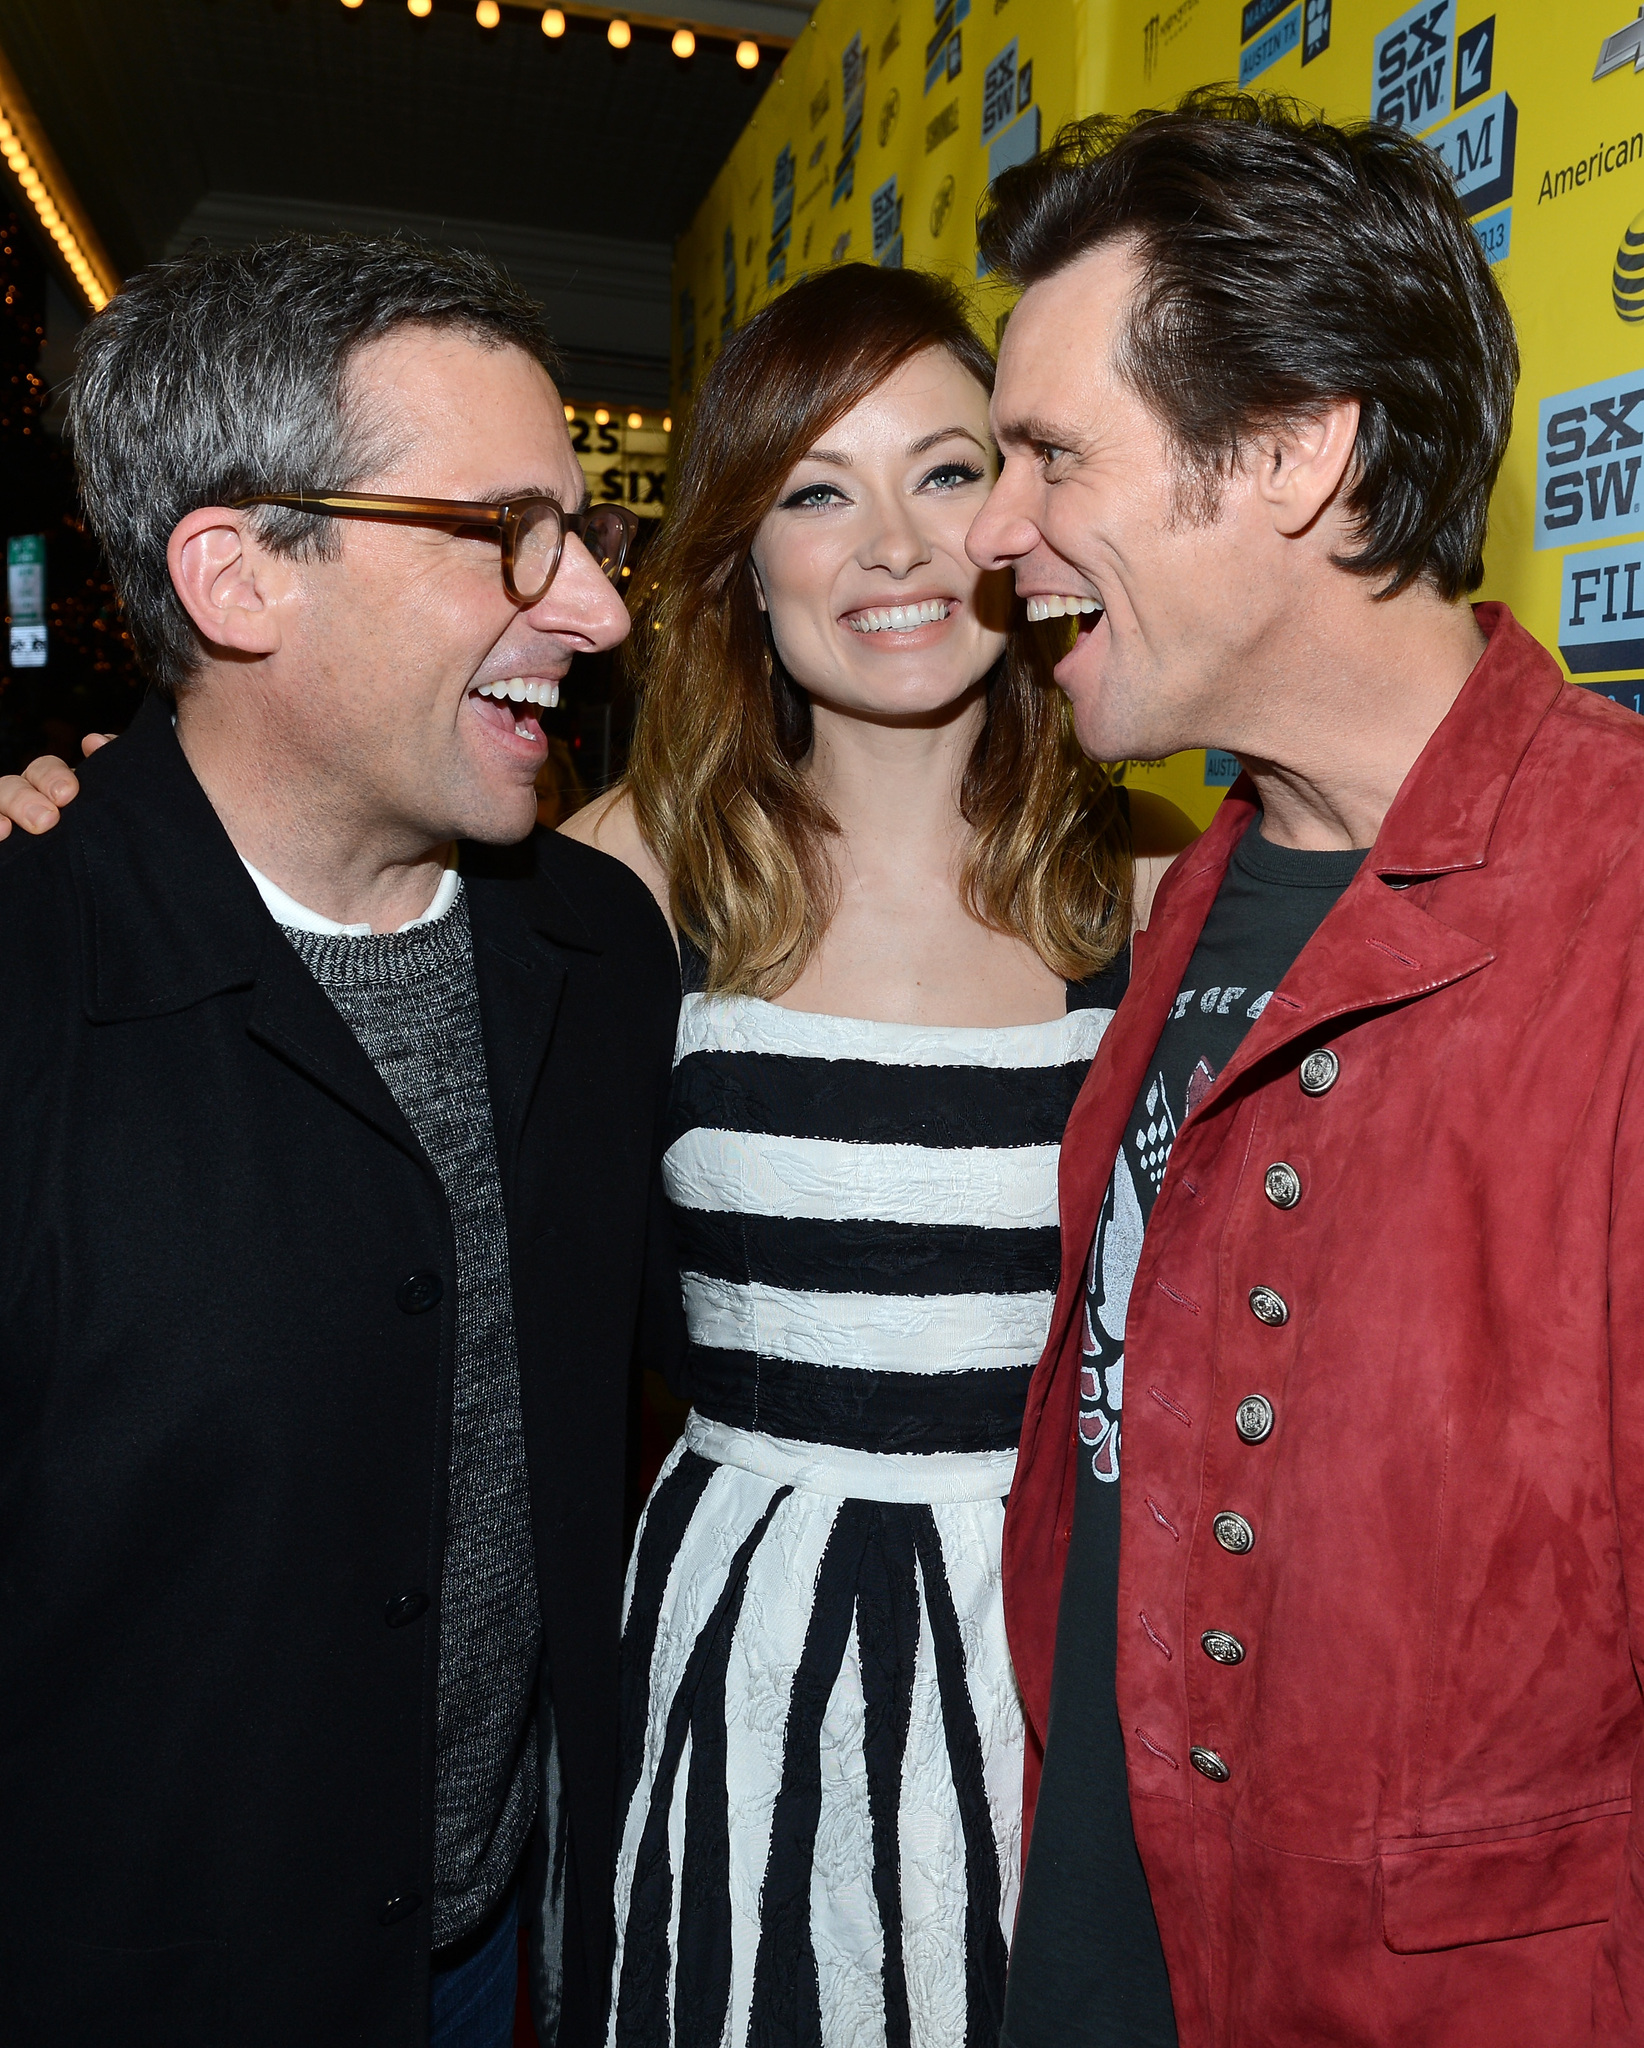 Jim Carrey, Steve Carell and Olivia Wilde at event of The Incredible Burt Wonderstone (2013)